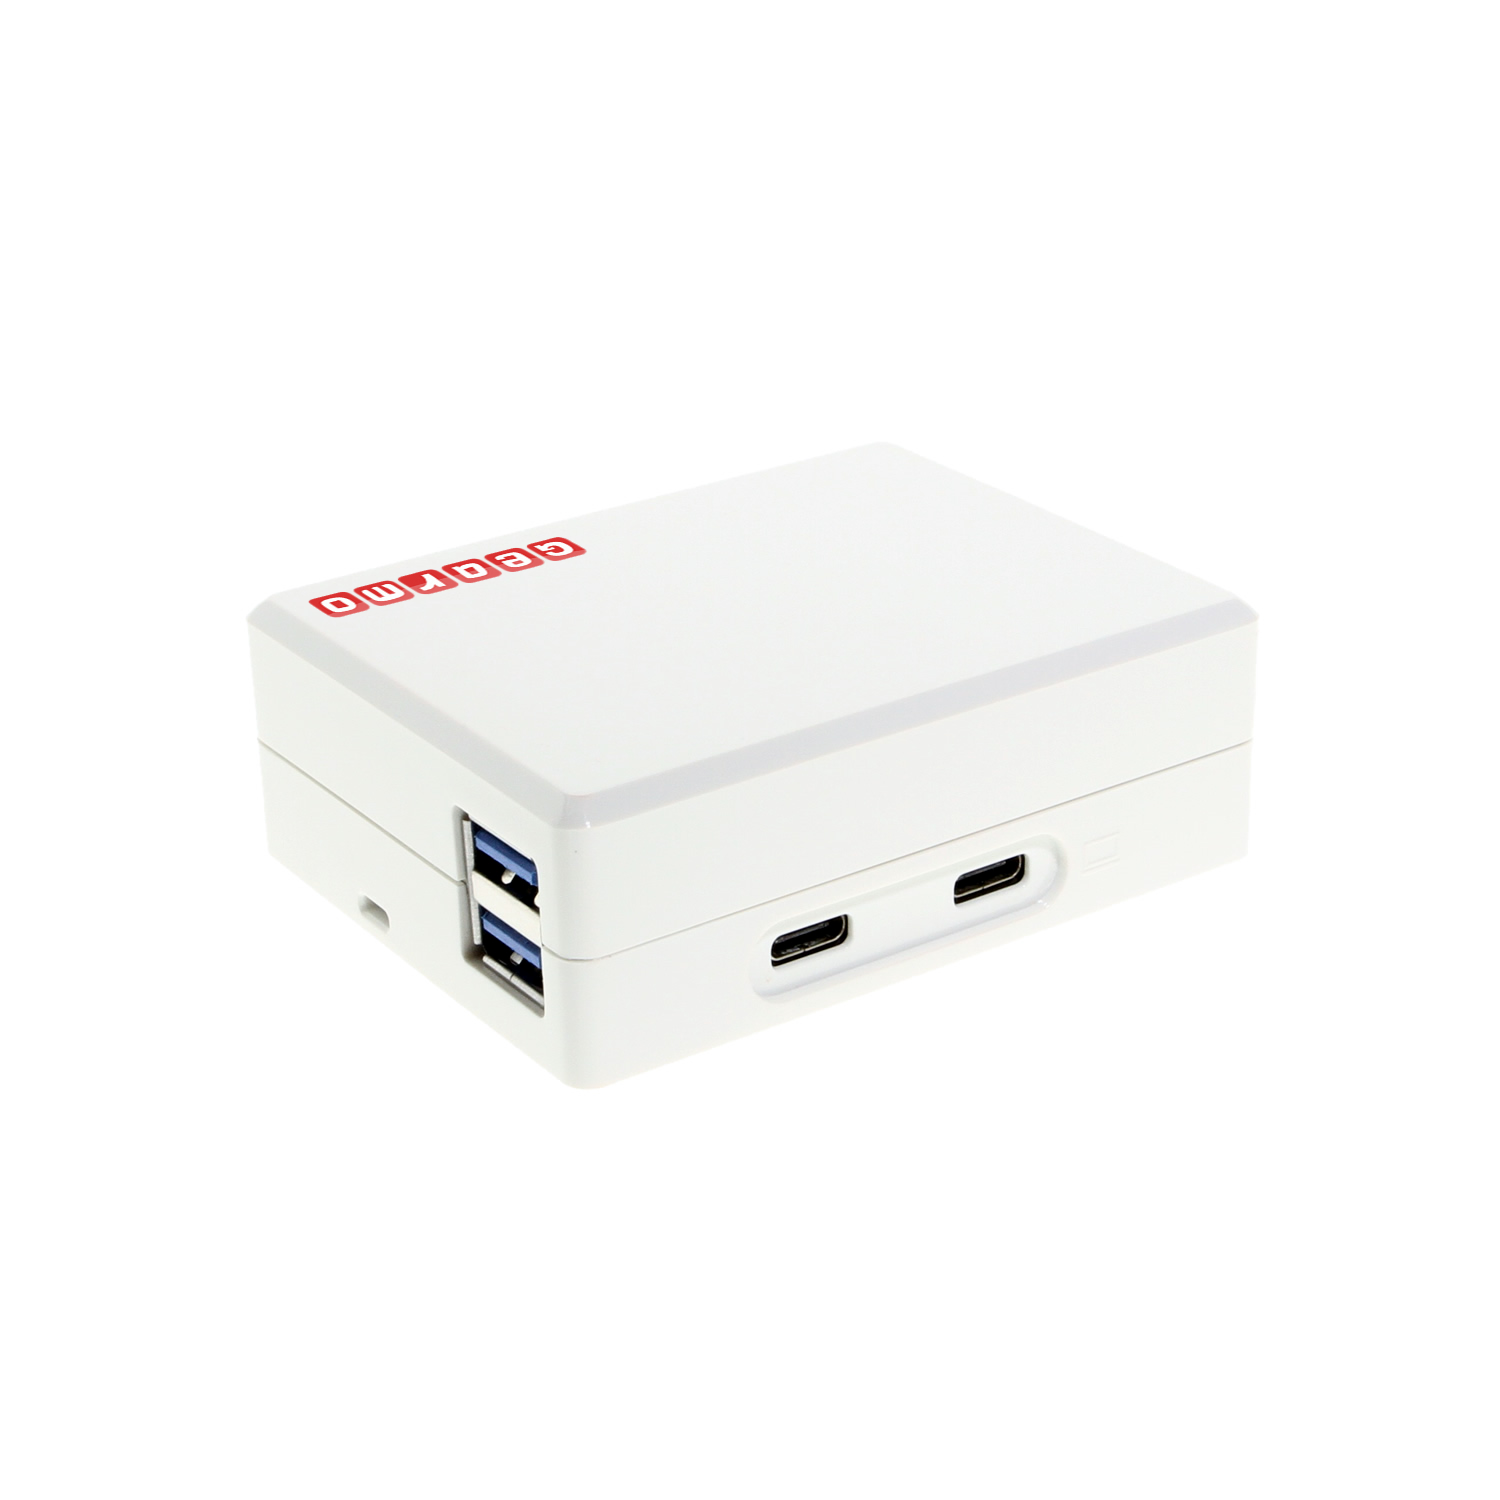 USB C PD Power Dock Notebooks HDMI Output